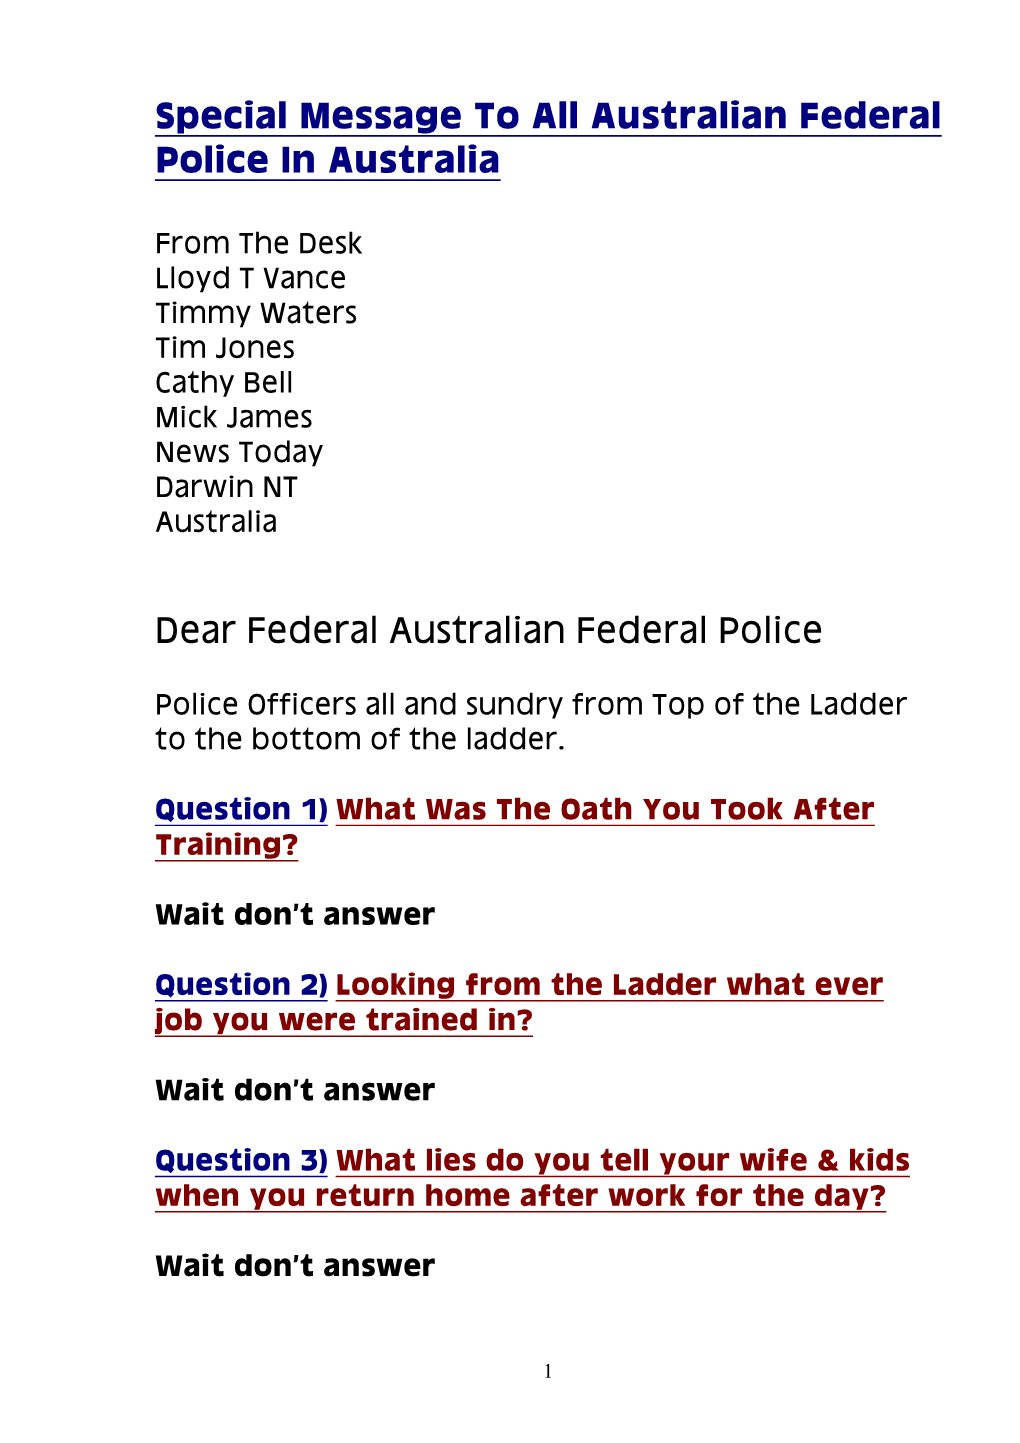 Special Message to All Australian Federal Police in Austra…